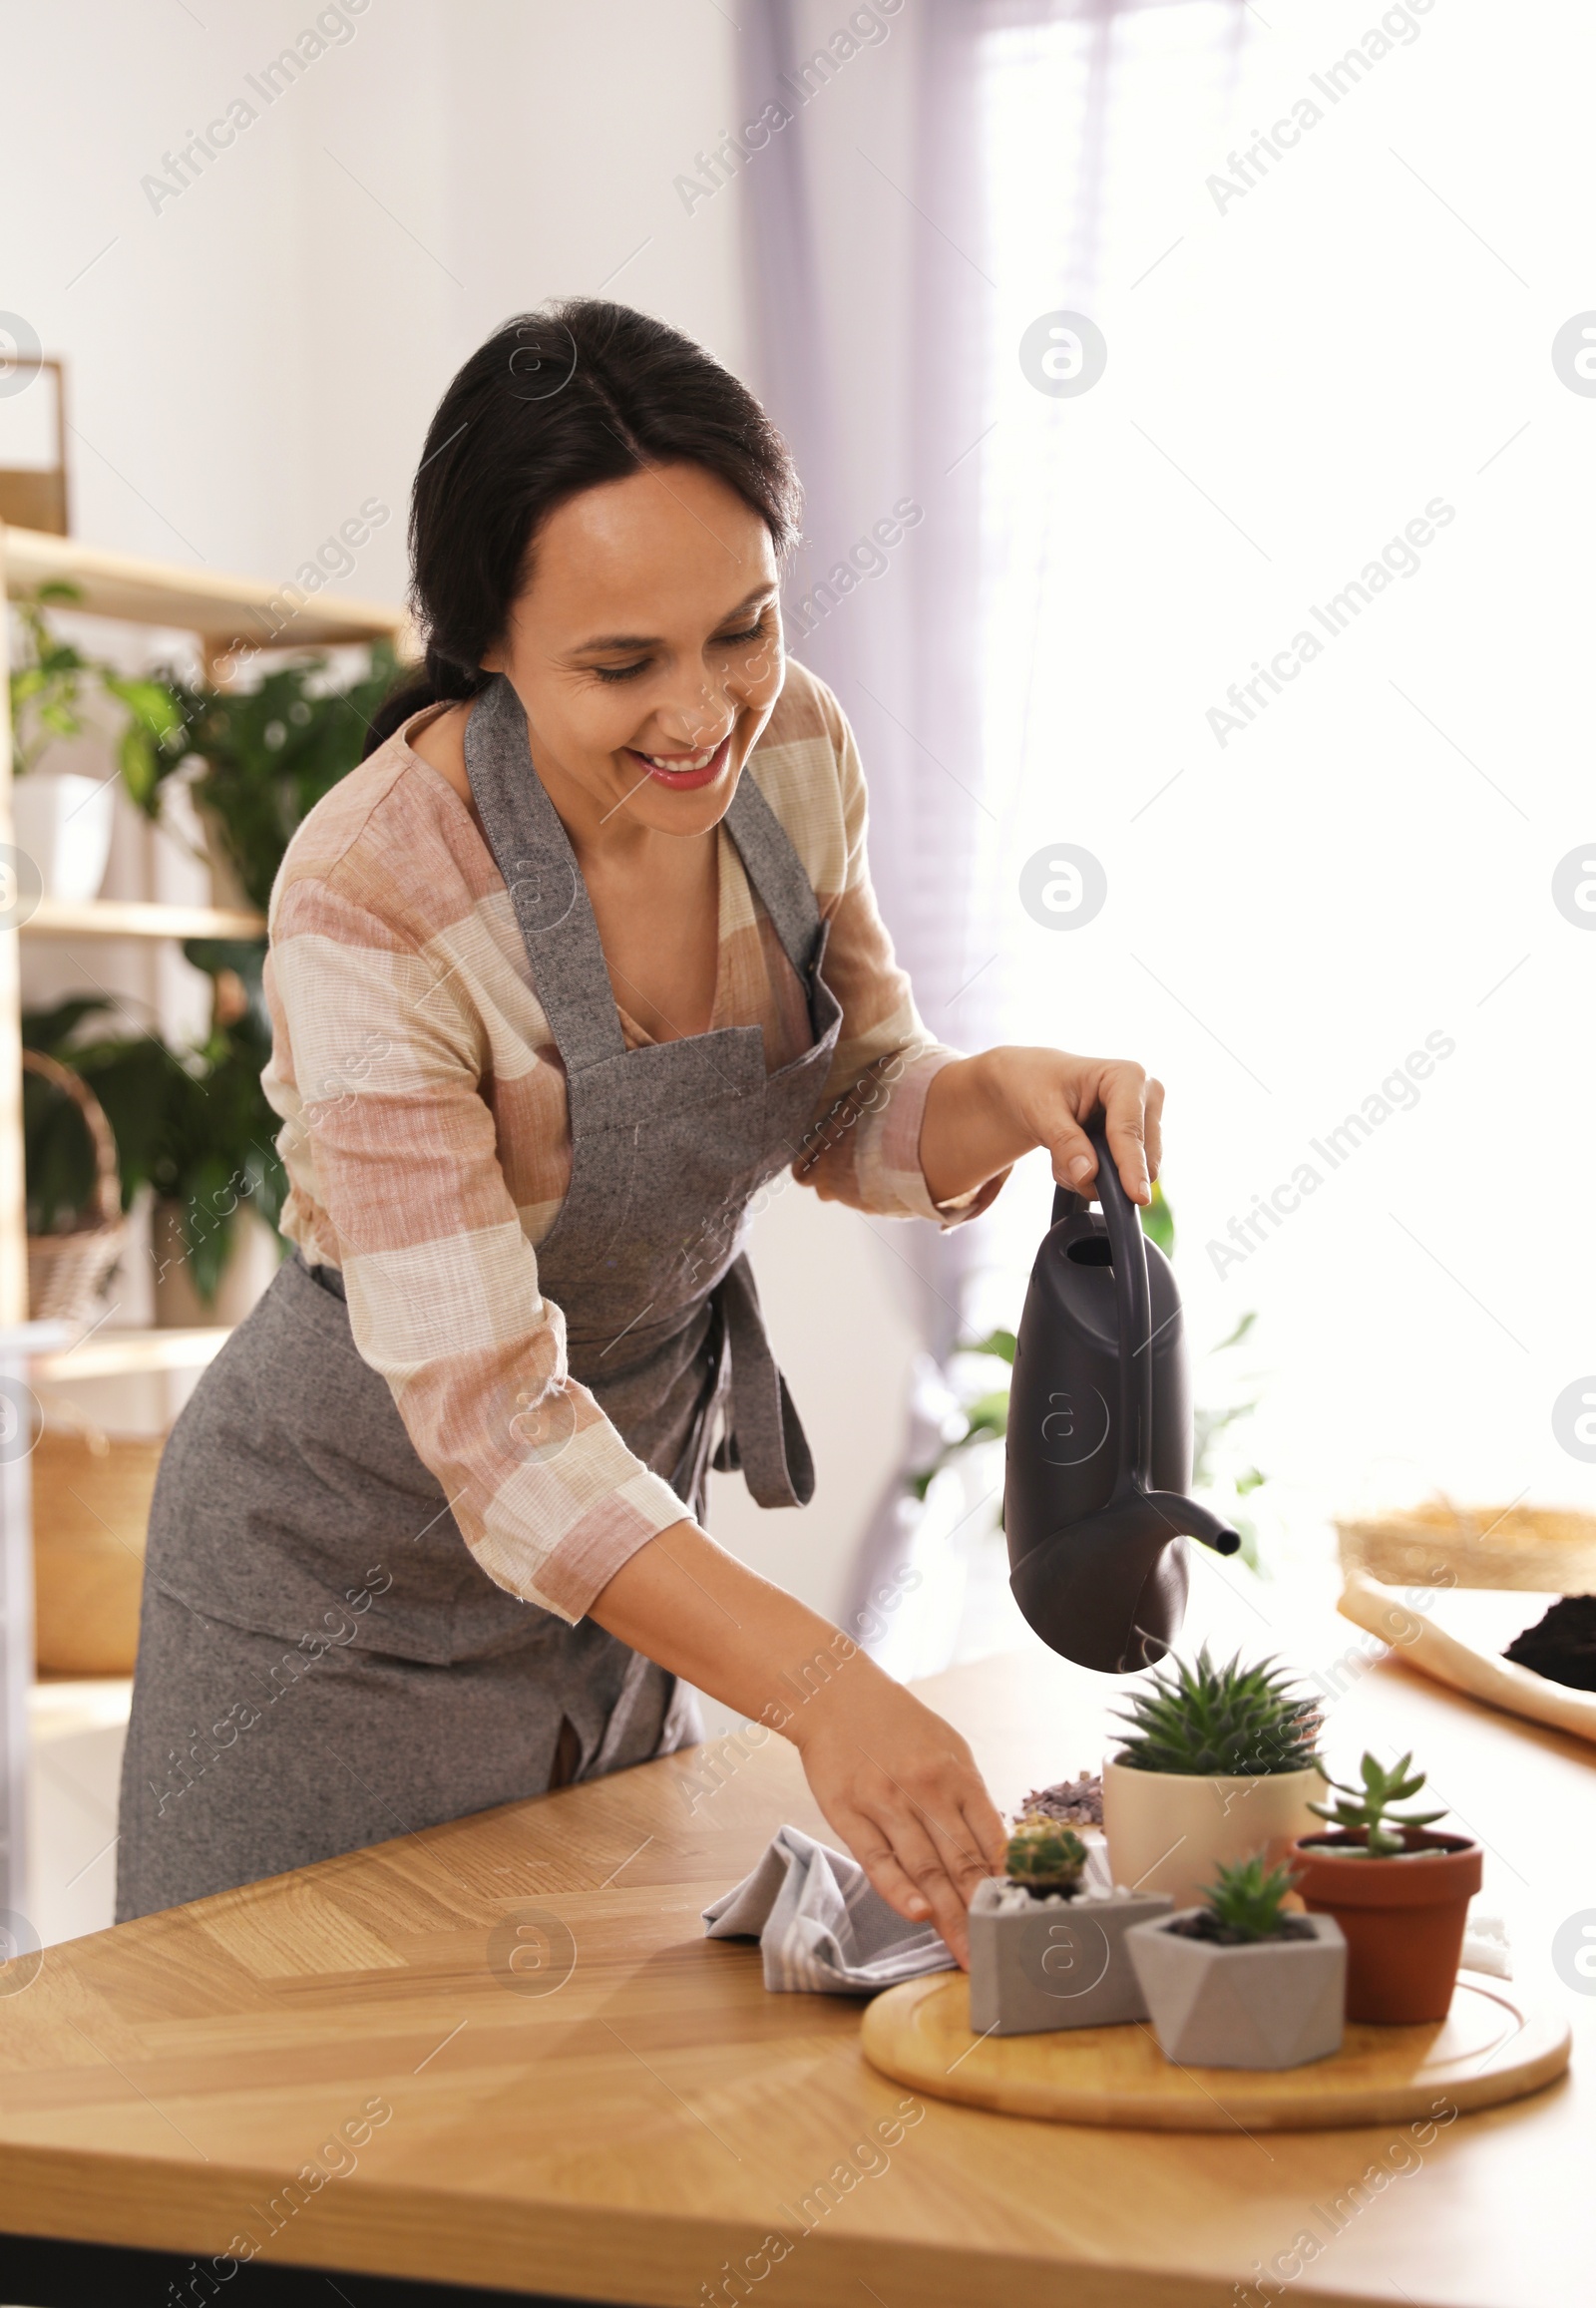 Photo of Mature woman watering houseplants at home. Engaging hobby